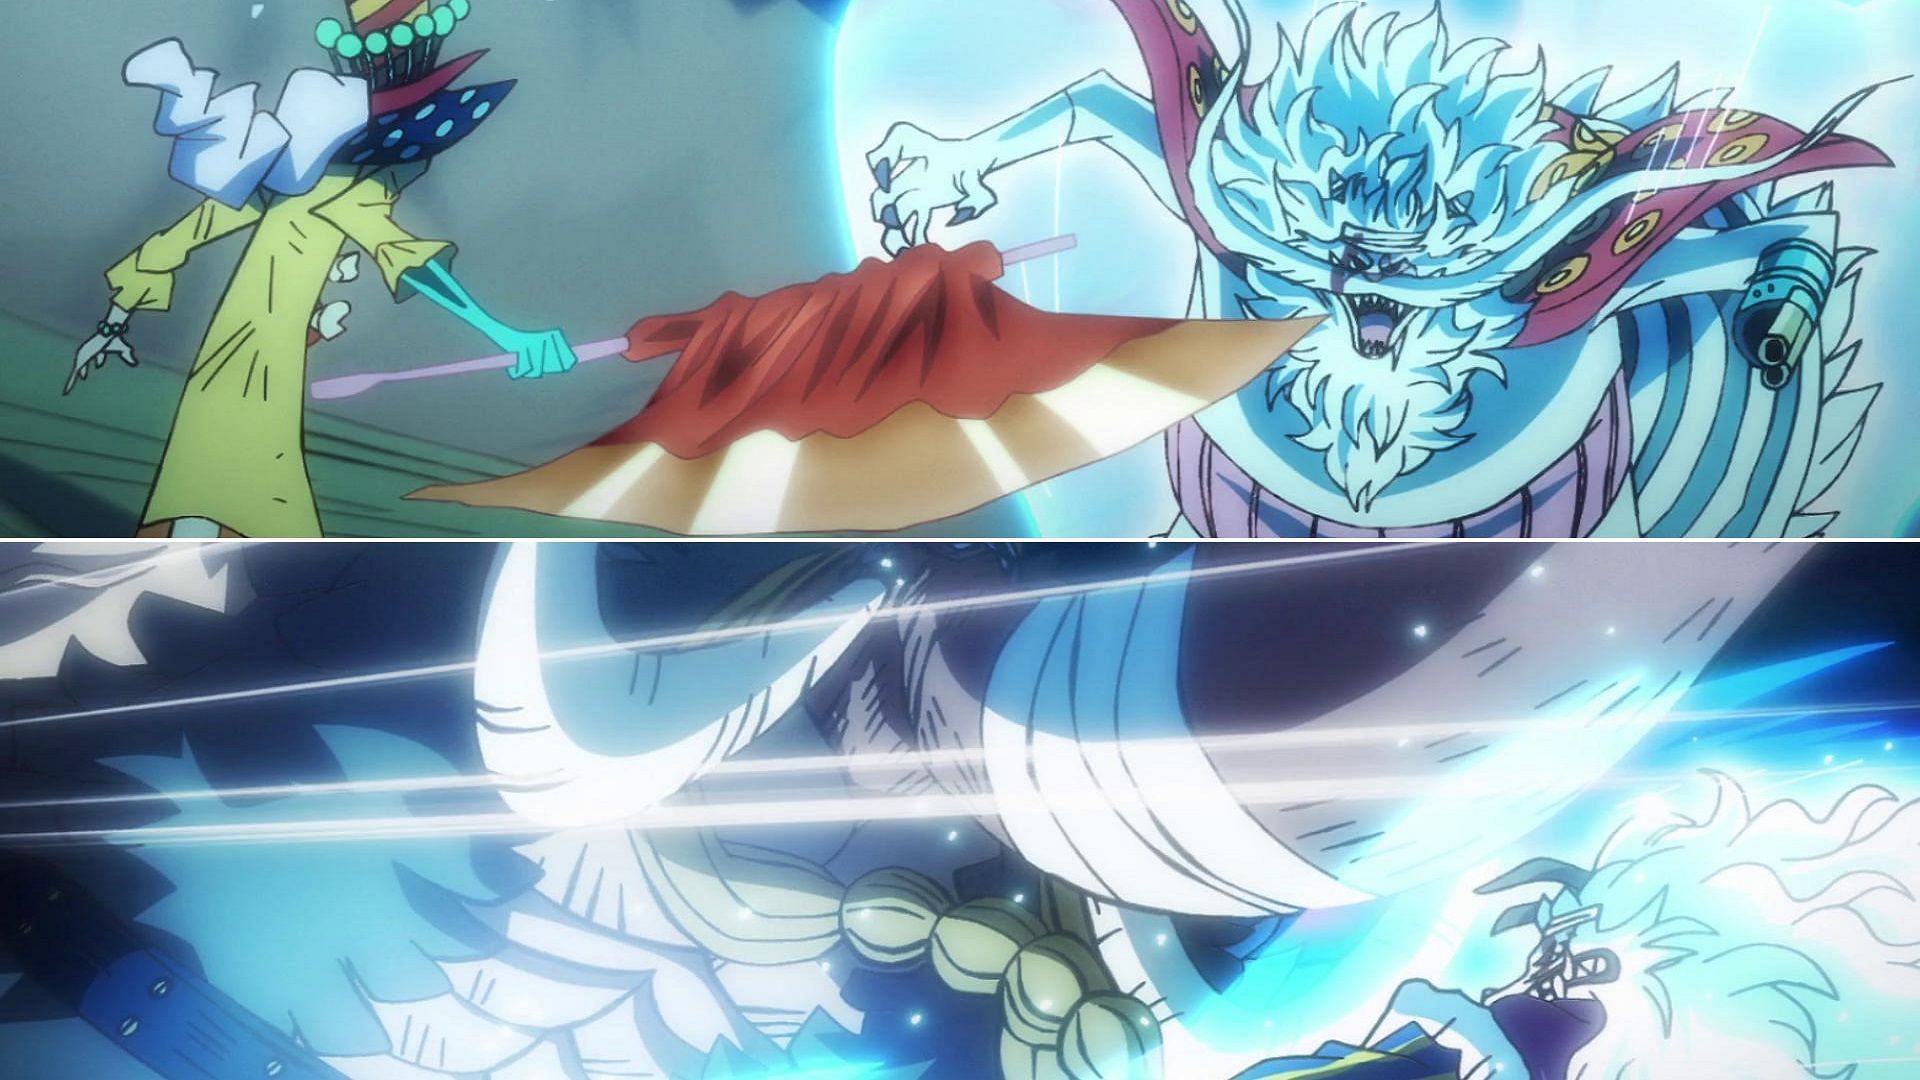 The Sulong Dukes vs Perospero and Jack as seen in One Piece (Image via Toei Animation, One Piece)